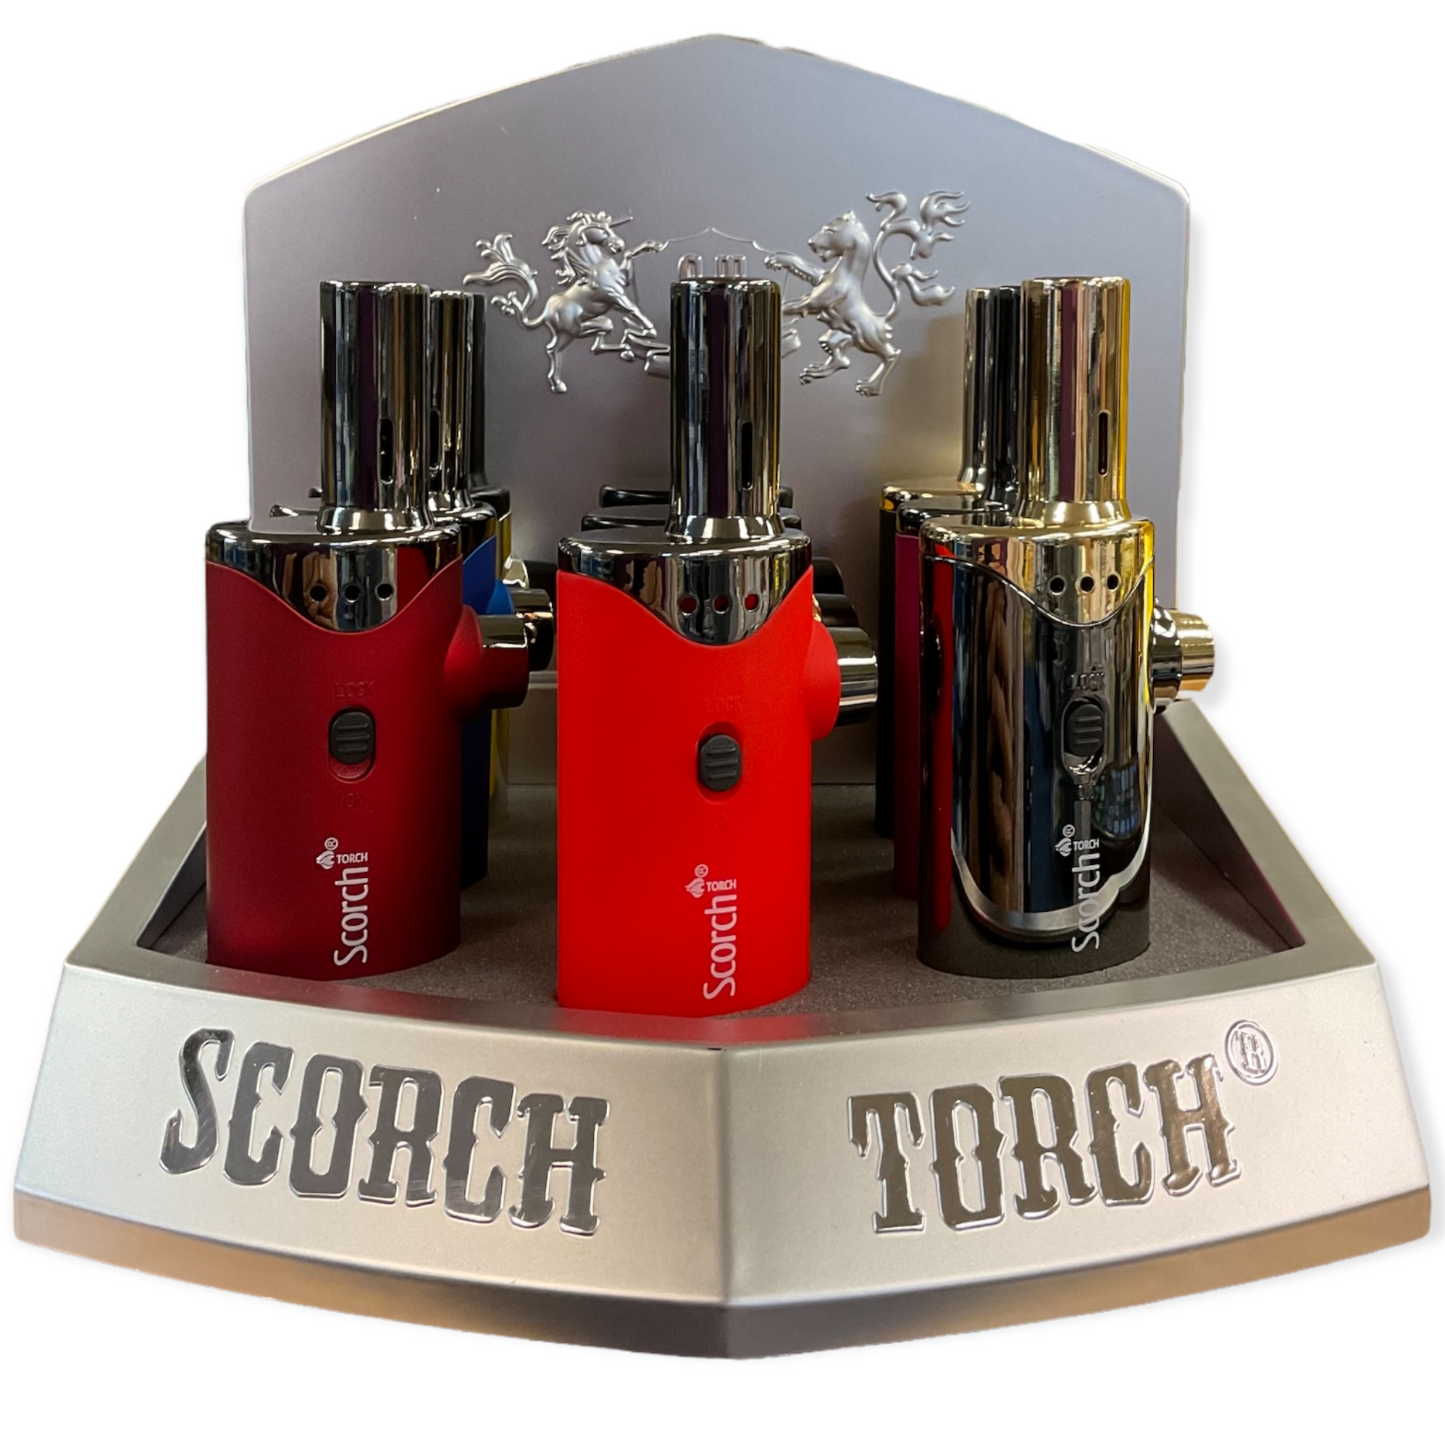 Scorch Torch - Tank w/Hold Button 9pk Display